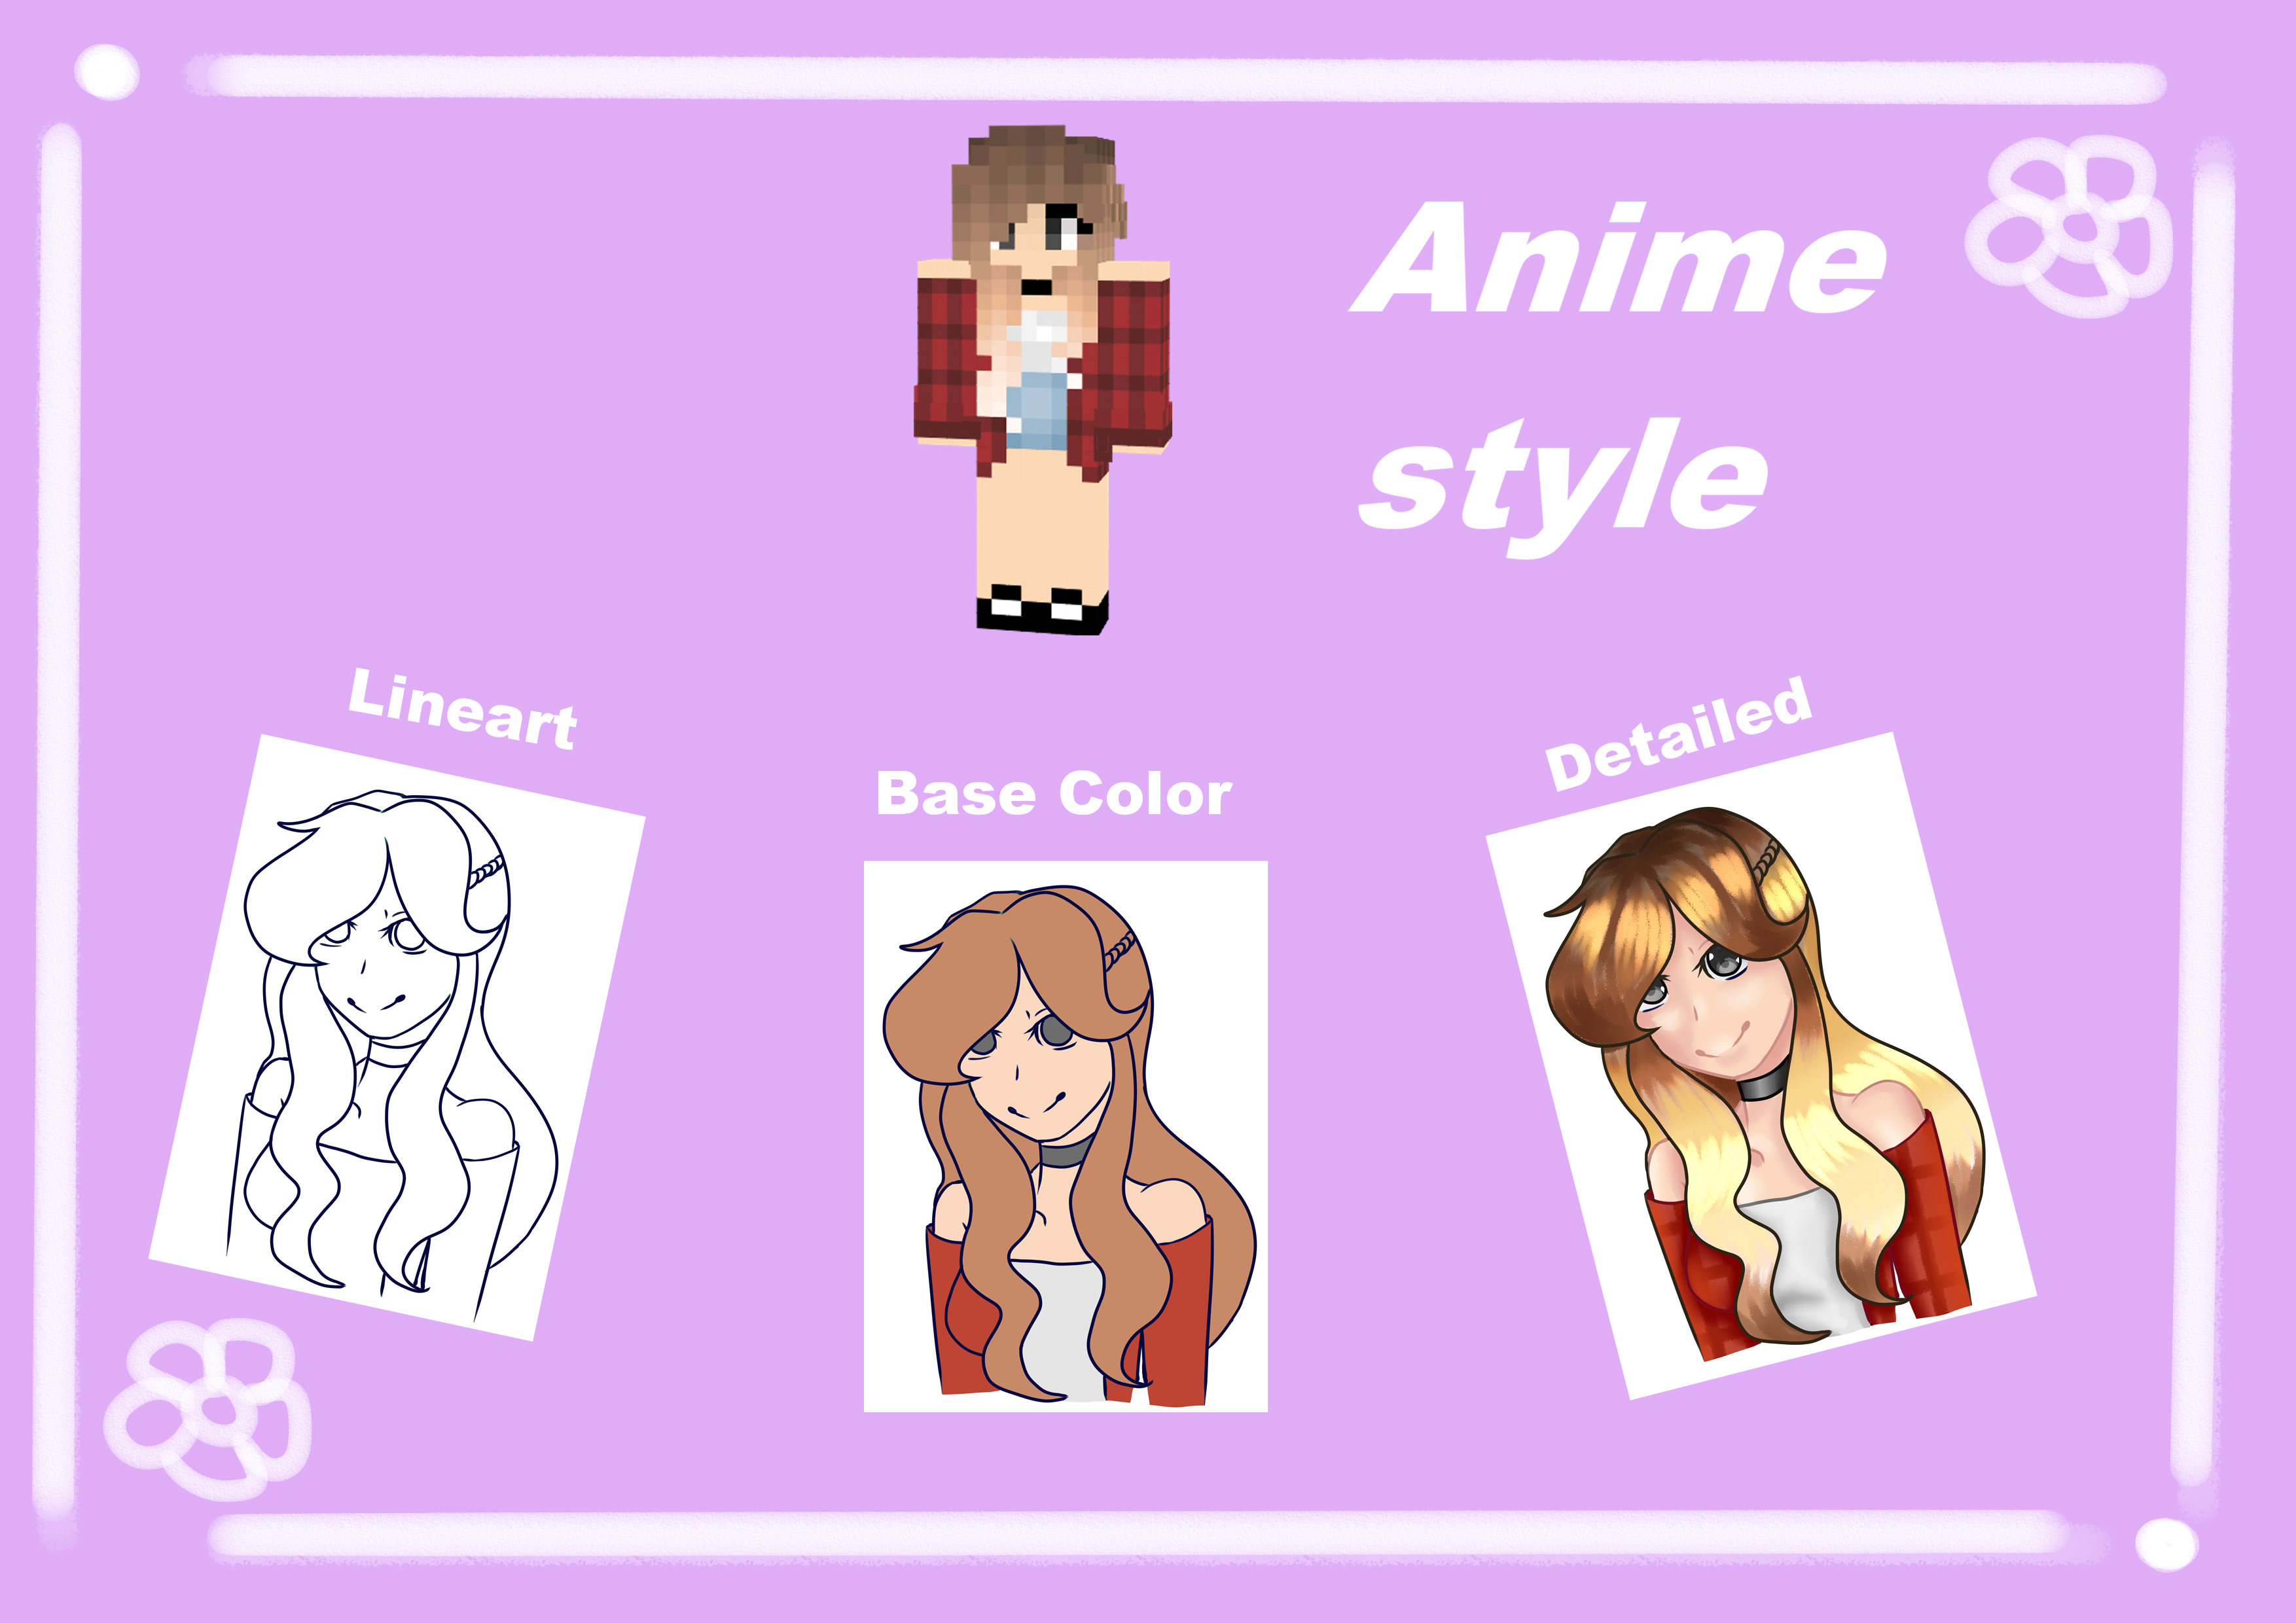 Draw Your Roblox Minecraft Or Other Games Oc Ir Avatar In Anime Style By Undercrafting Fiverr - roblox oc base